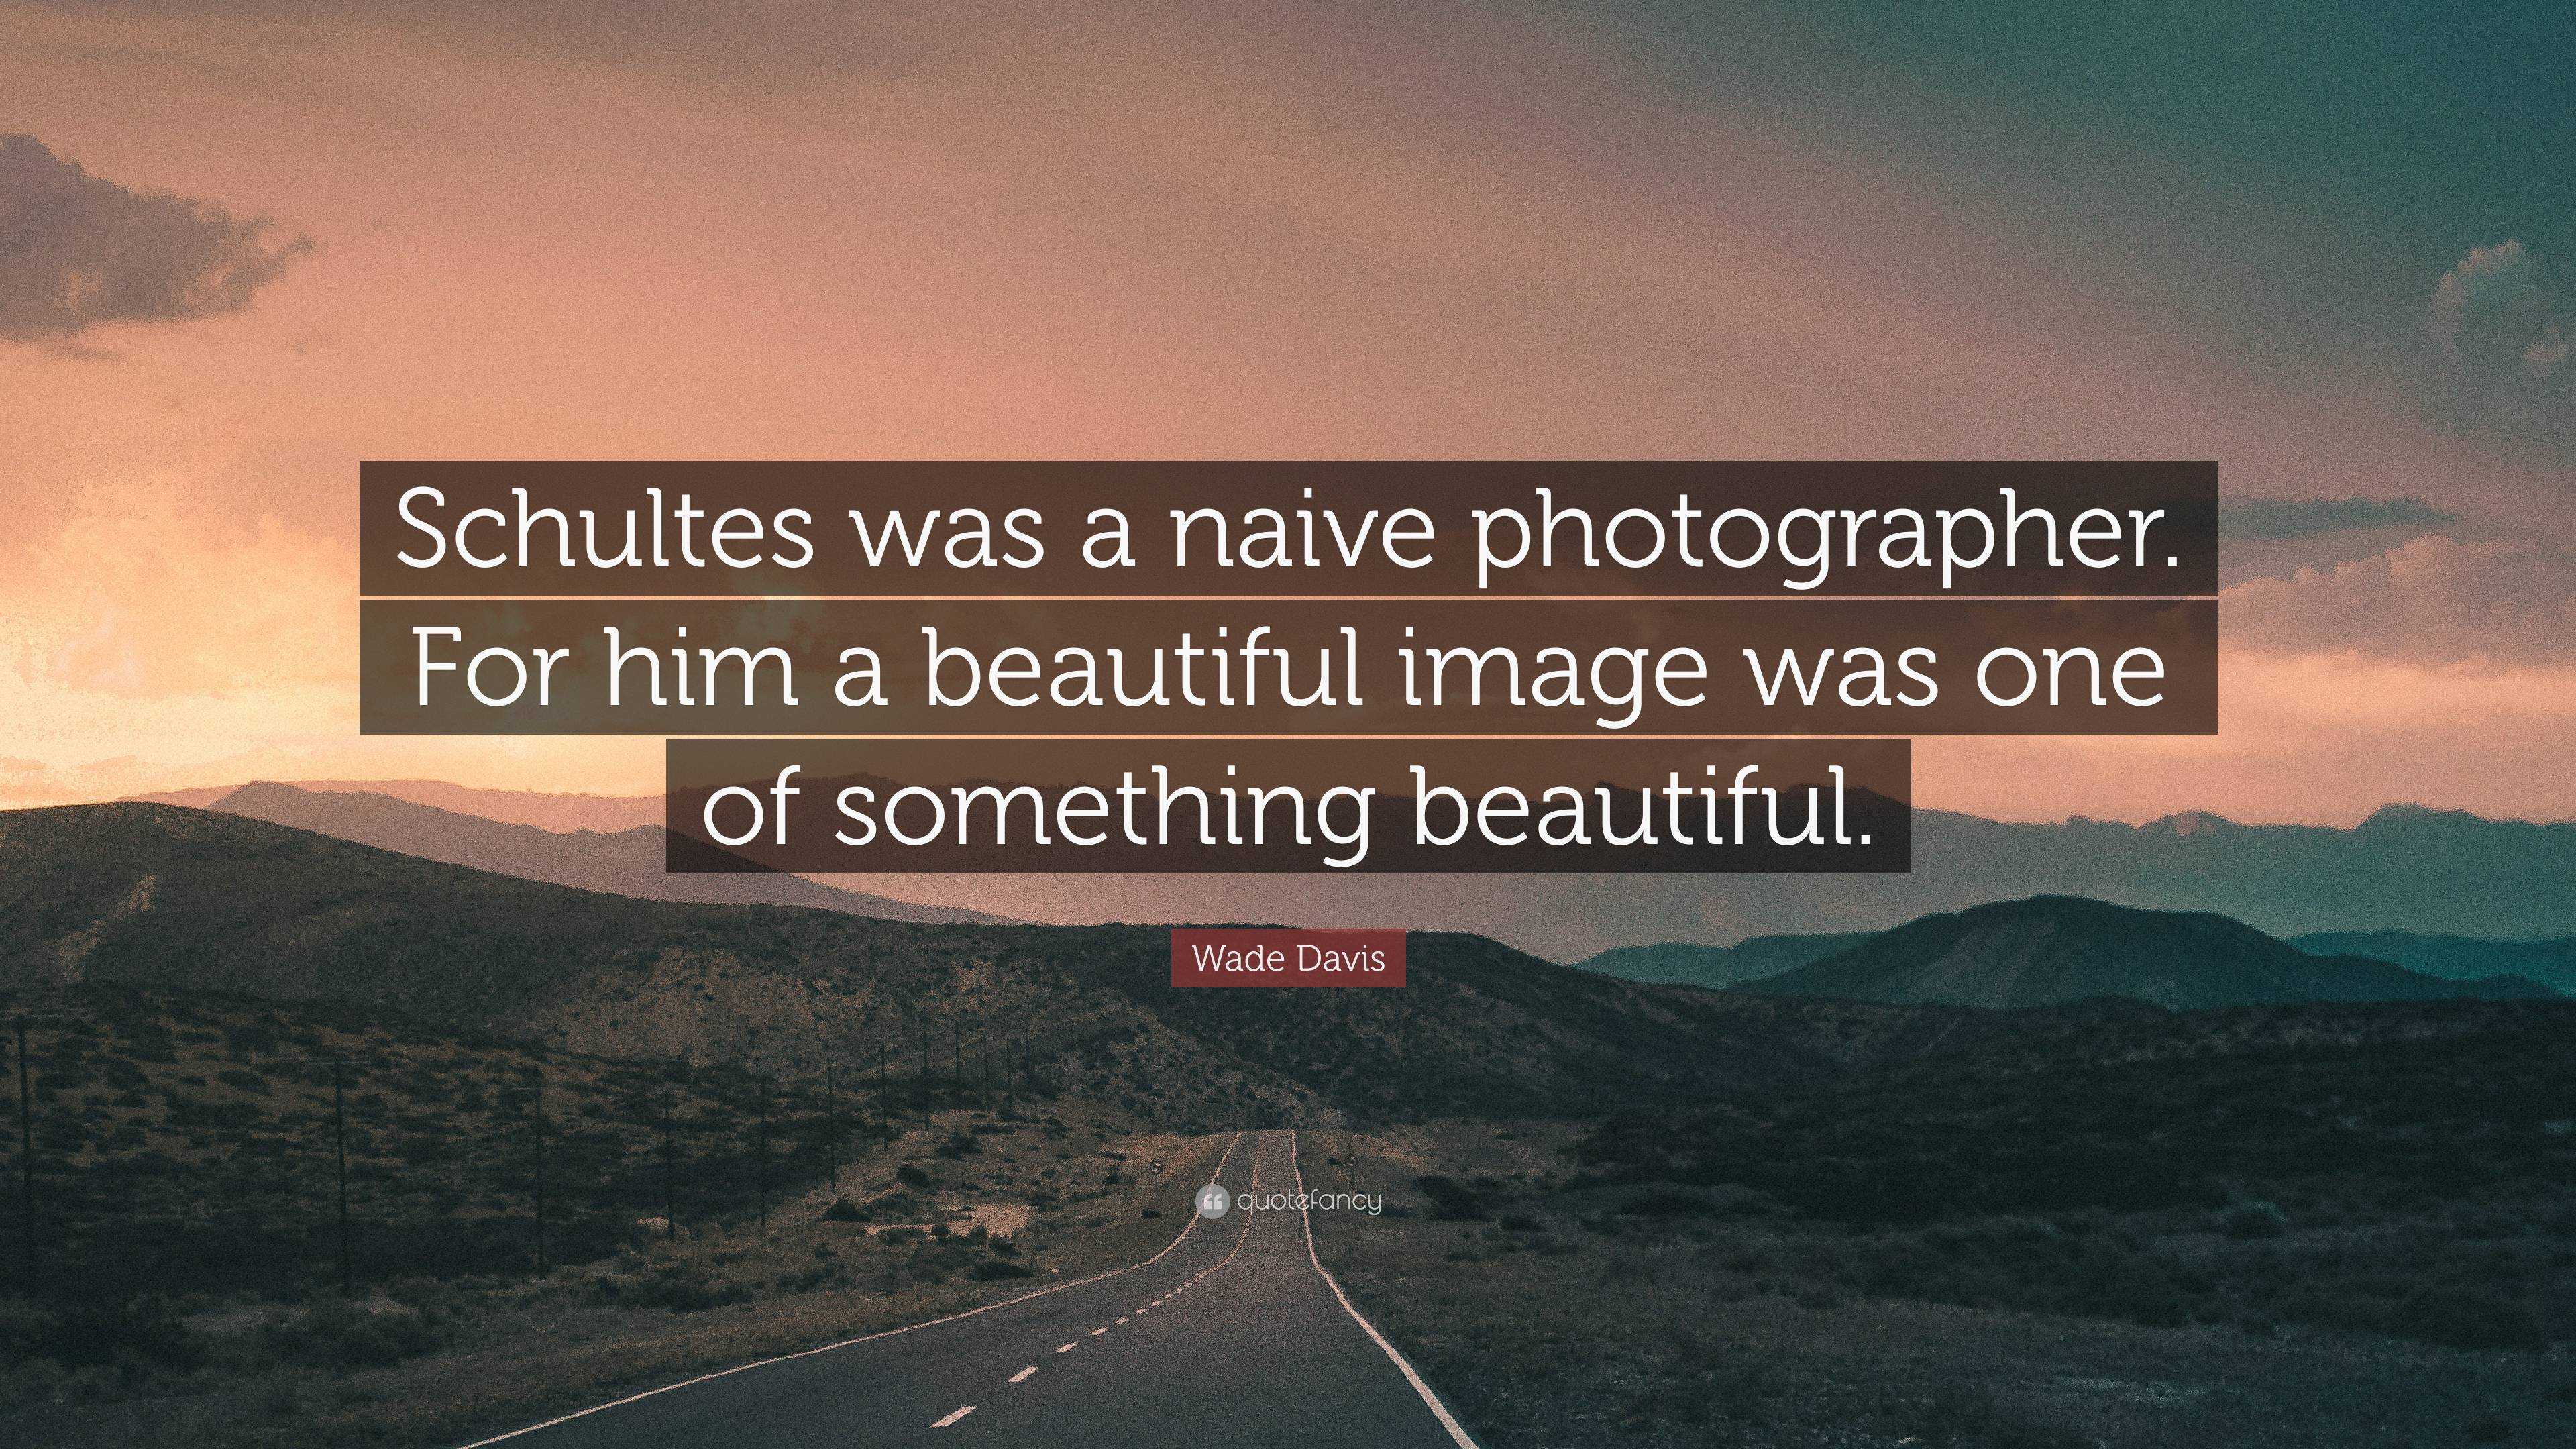 Wade Davis Quote: “Schultes was a naive photographer. For him a ...